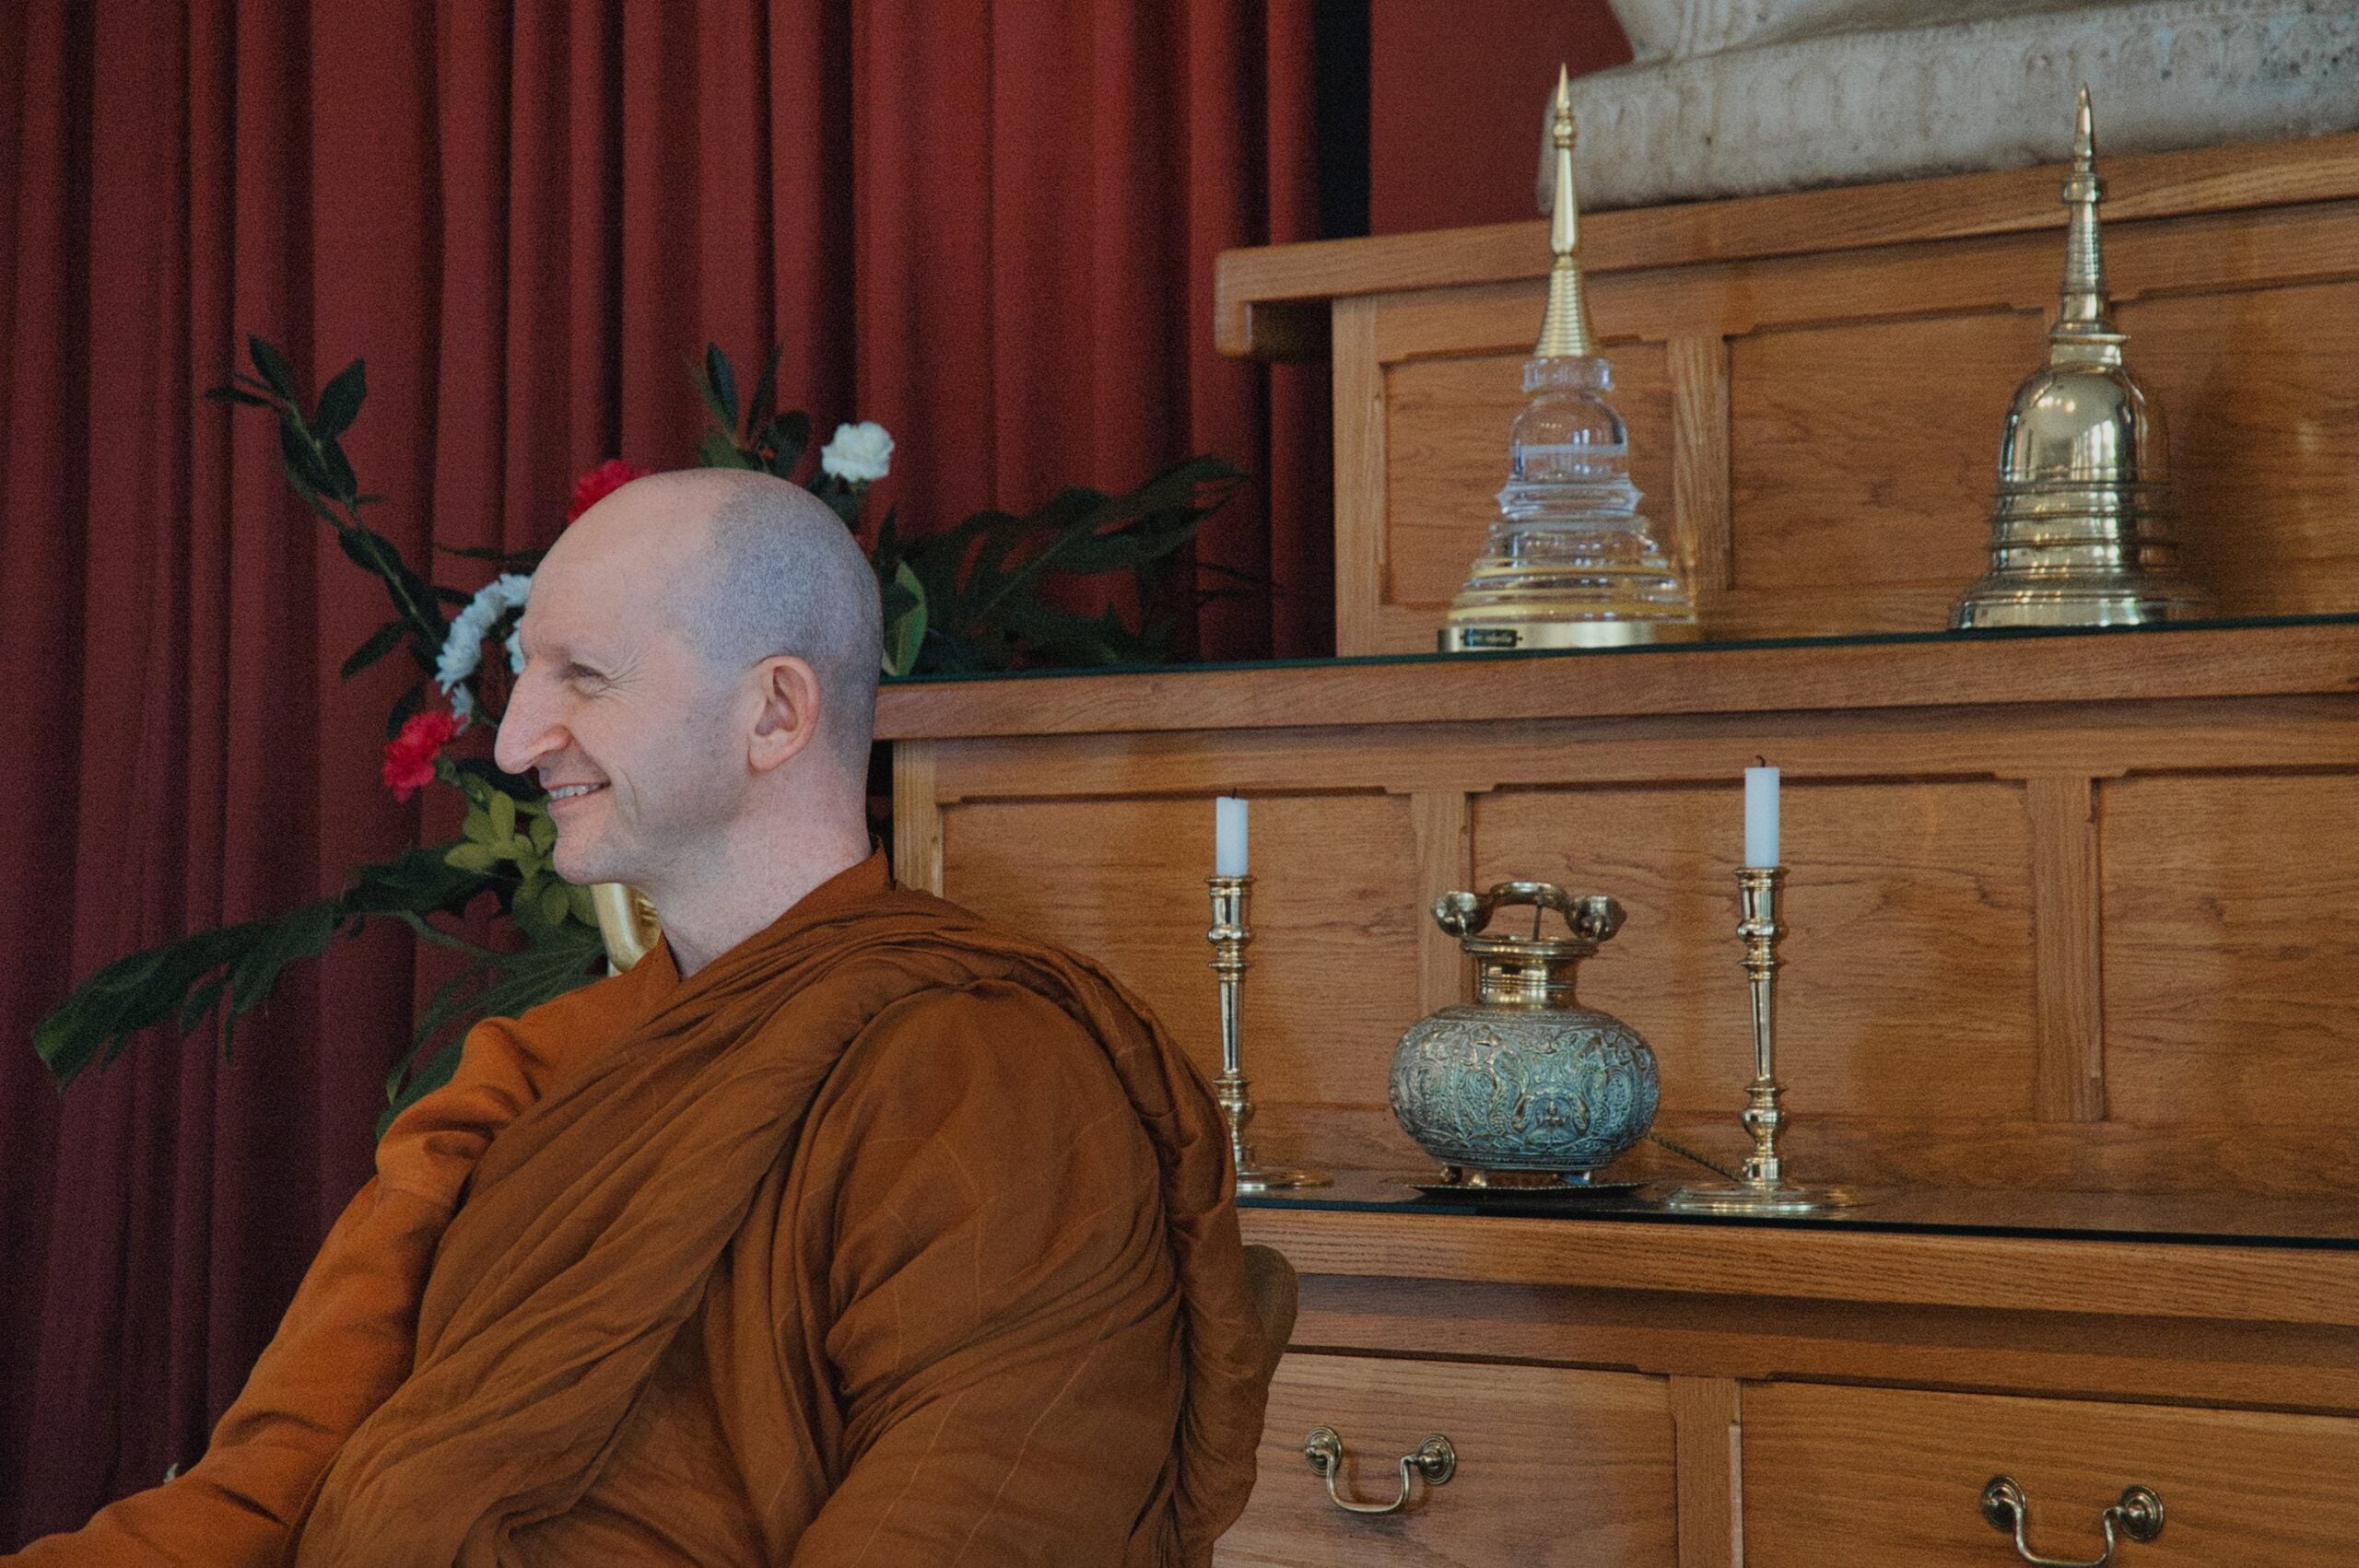 2010.11.23 Good Morning Evermore – Ajahn Amaro’s First Day as the Abbot